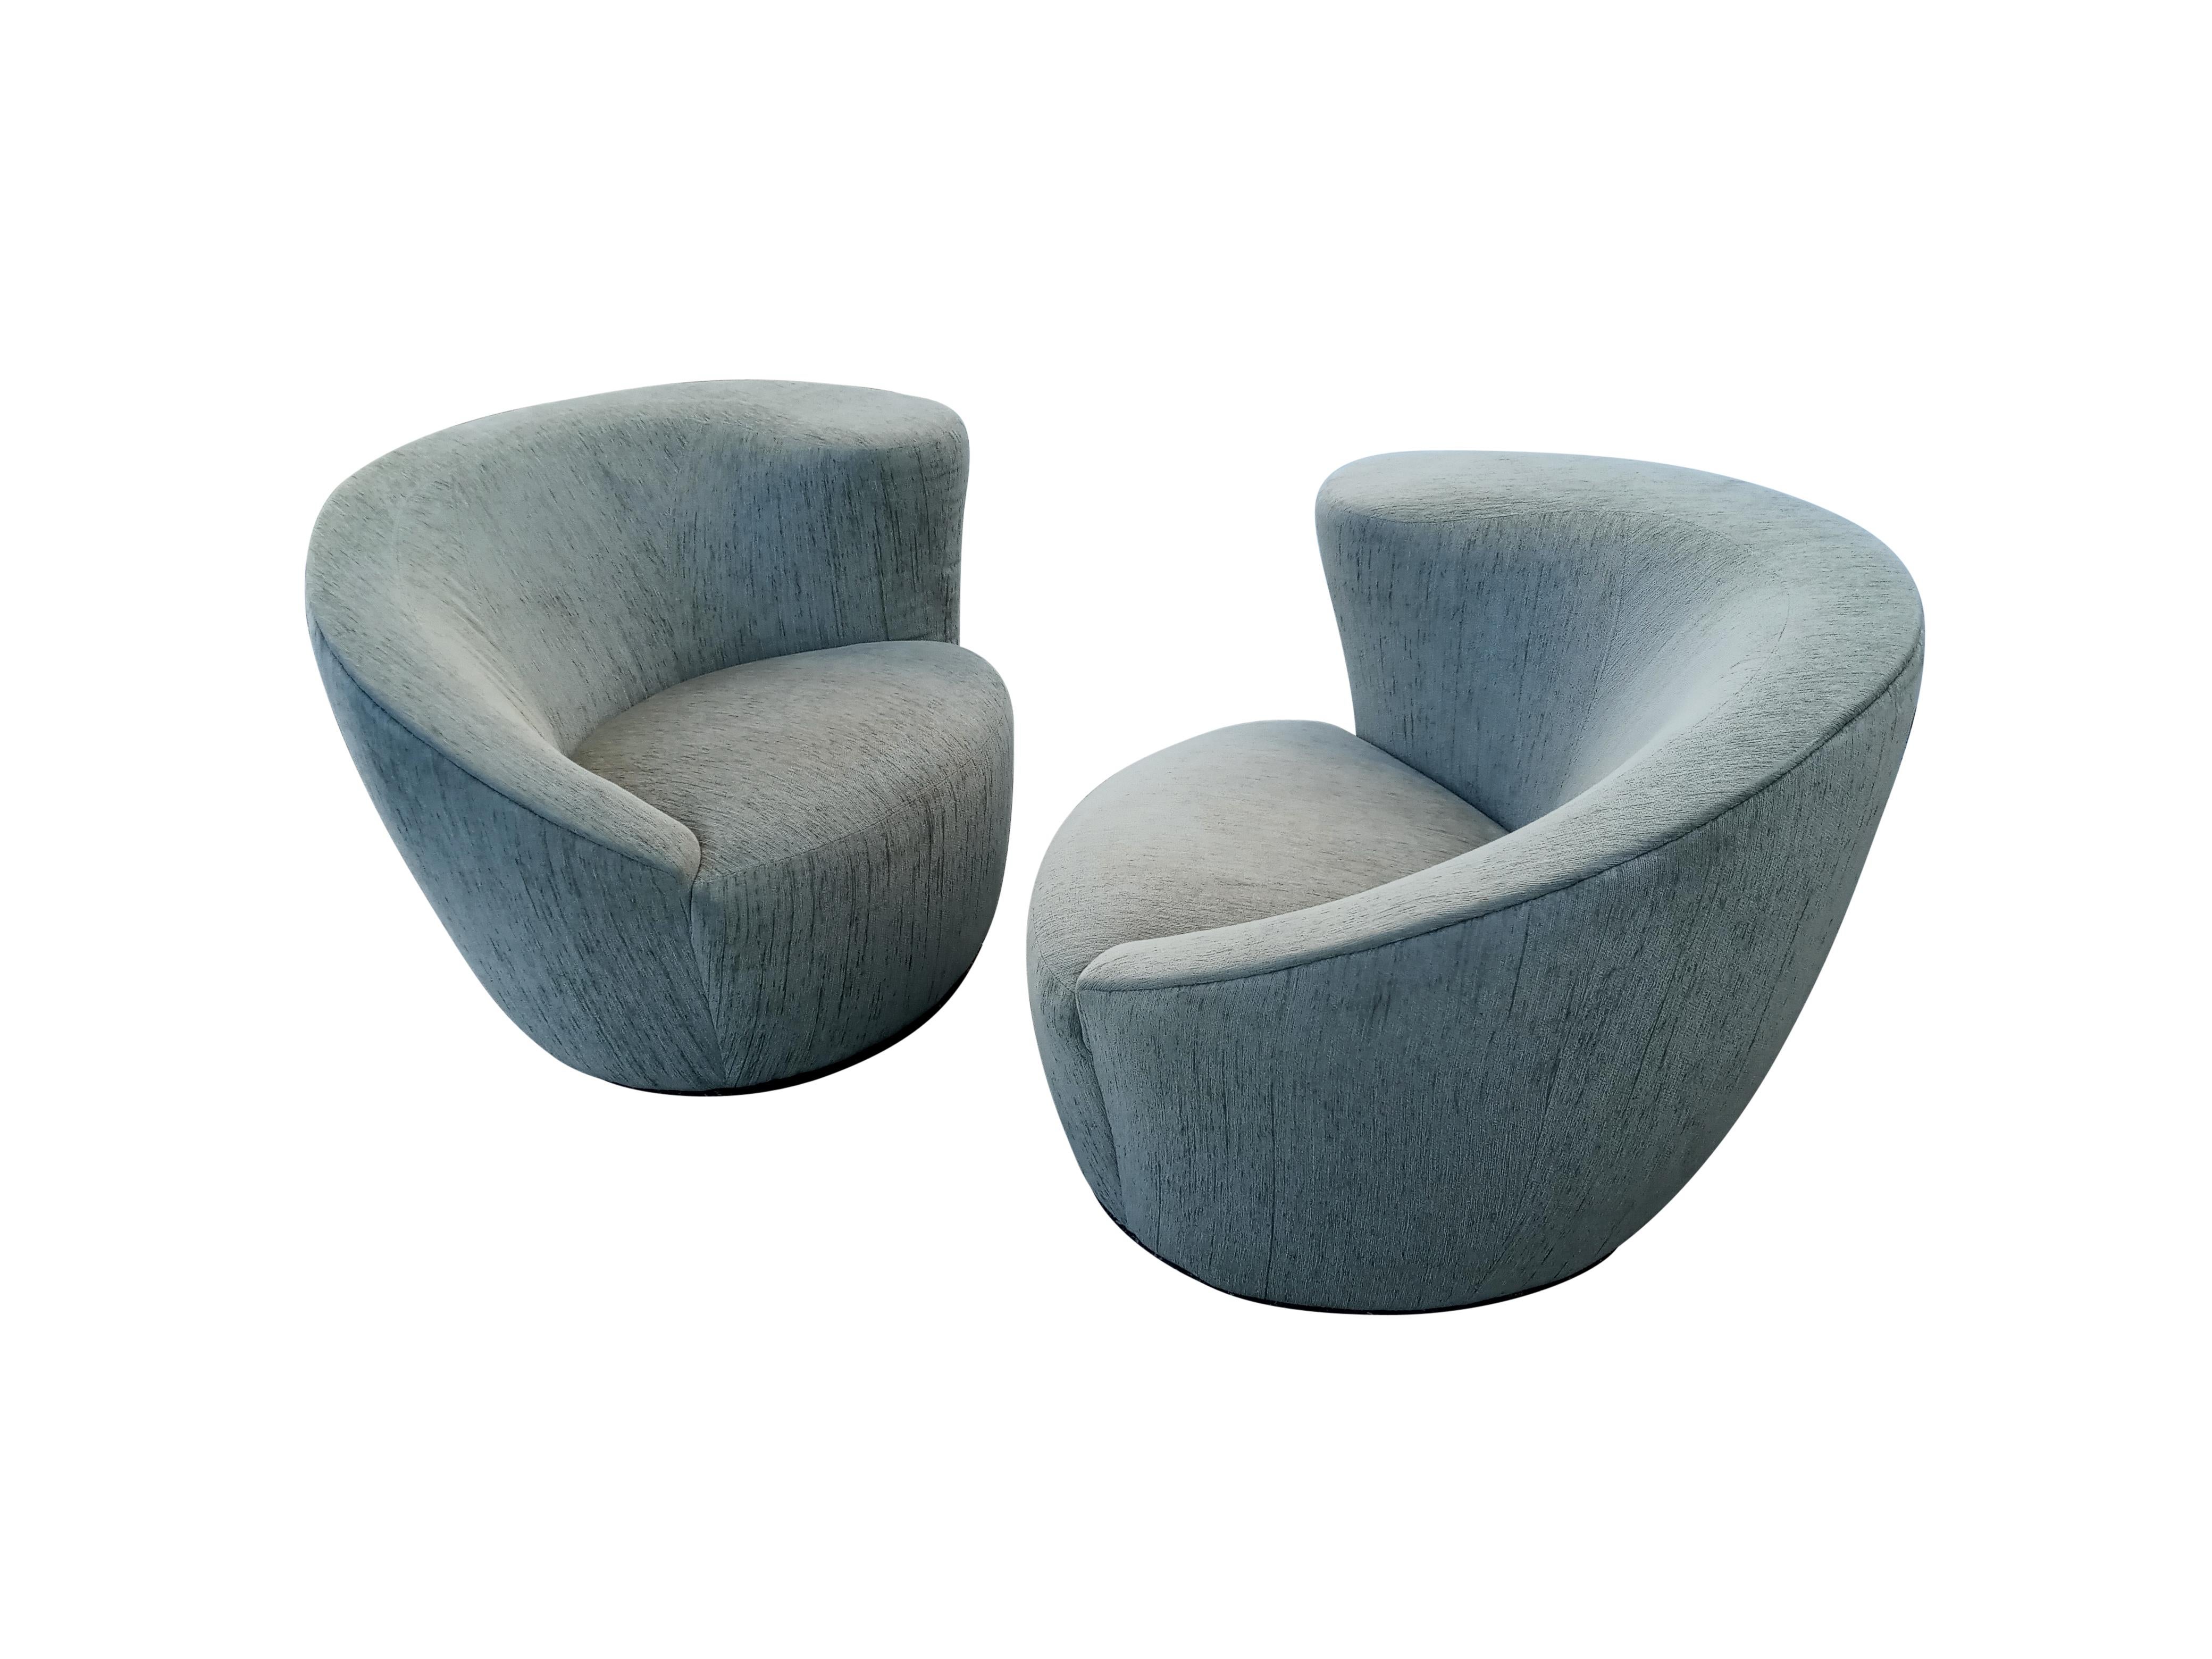 This pair of very attractive Nautilus chairs have a sculptural profile that is only rivaled by how extremely comfortable they are. The fully upholstered forms are mounted on a thick flat black painted wooden base with a spring loaded lazy-susan